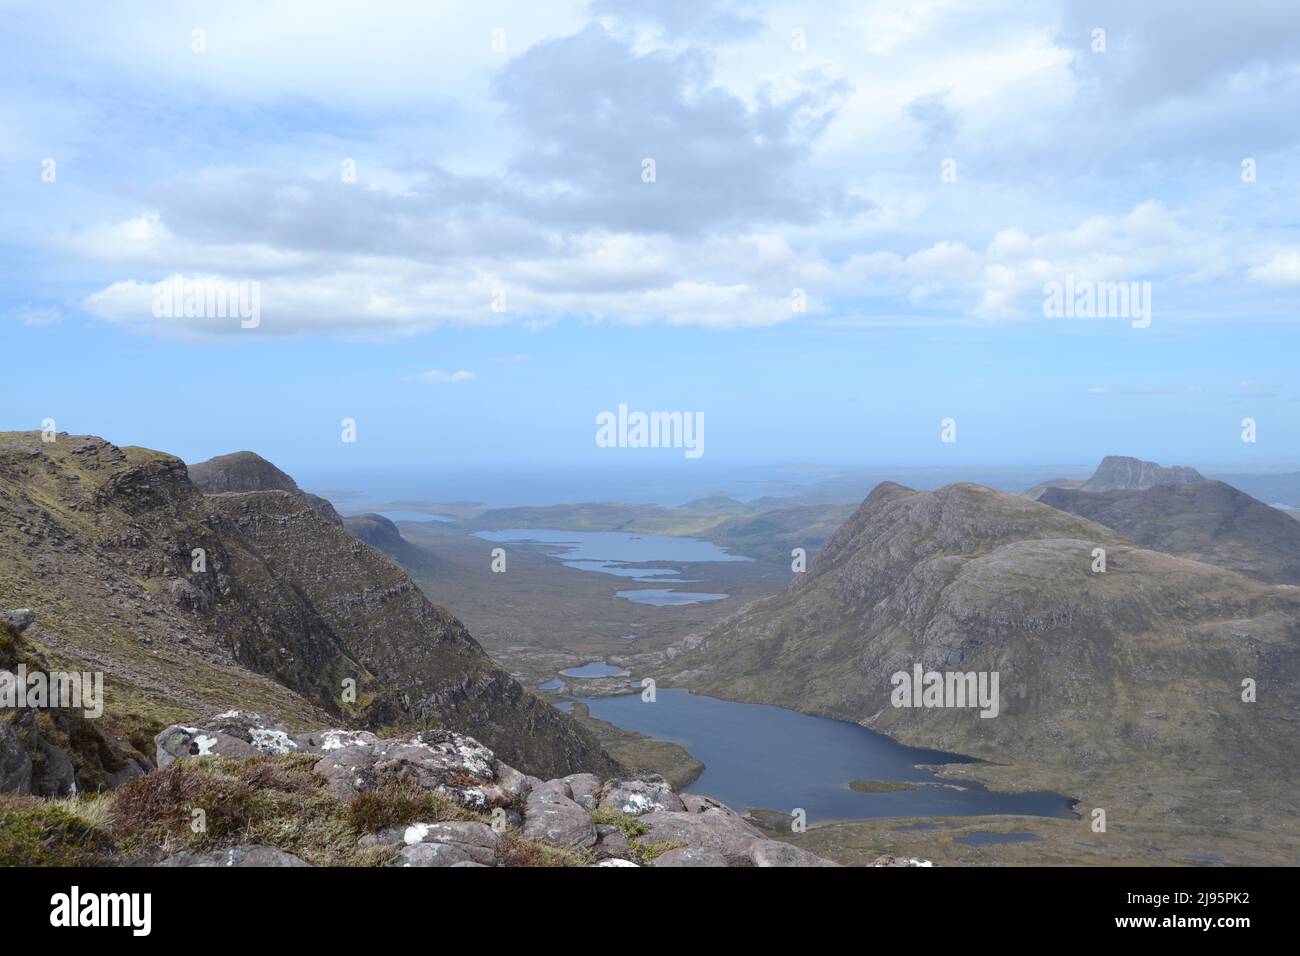 Ben Mor Coigach, an fab ridge near Ullapool, hikers, walkers, views of Summer Isles and Suilven mountain, Stac Poilaidh and Cul Mor views Sandstone Stock Photo